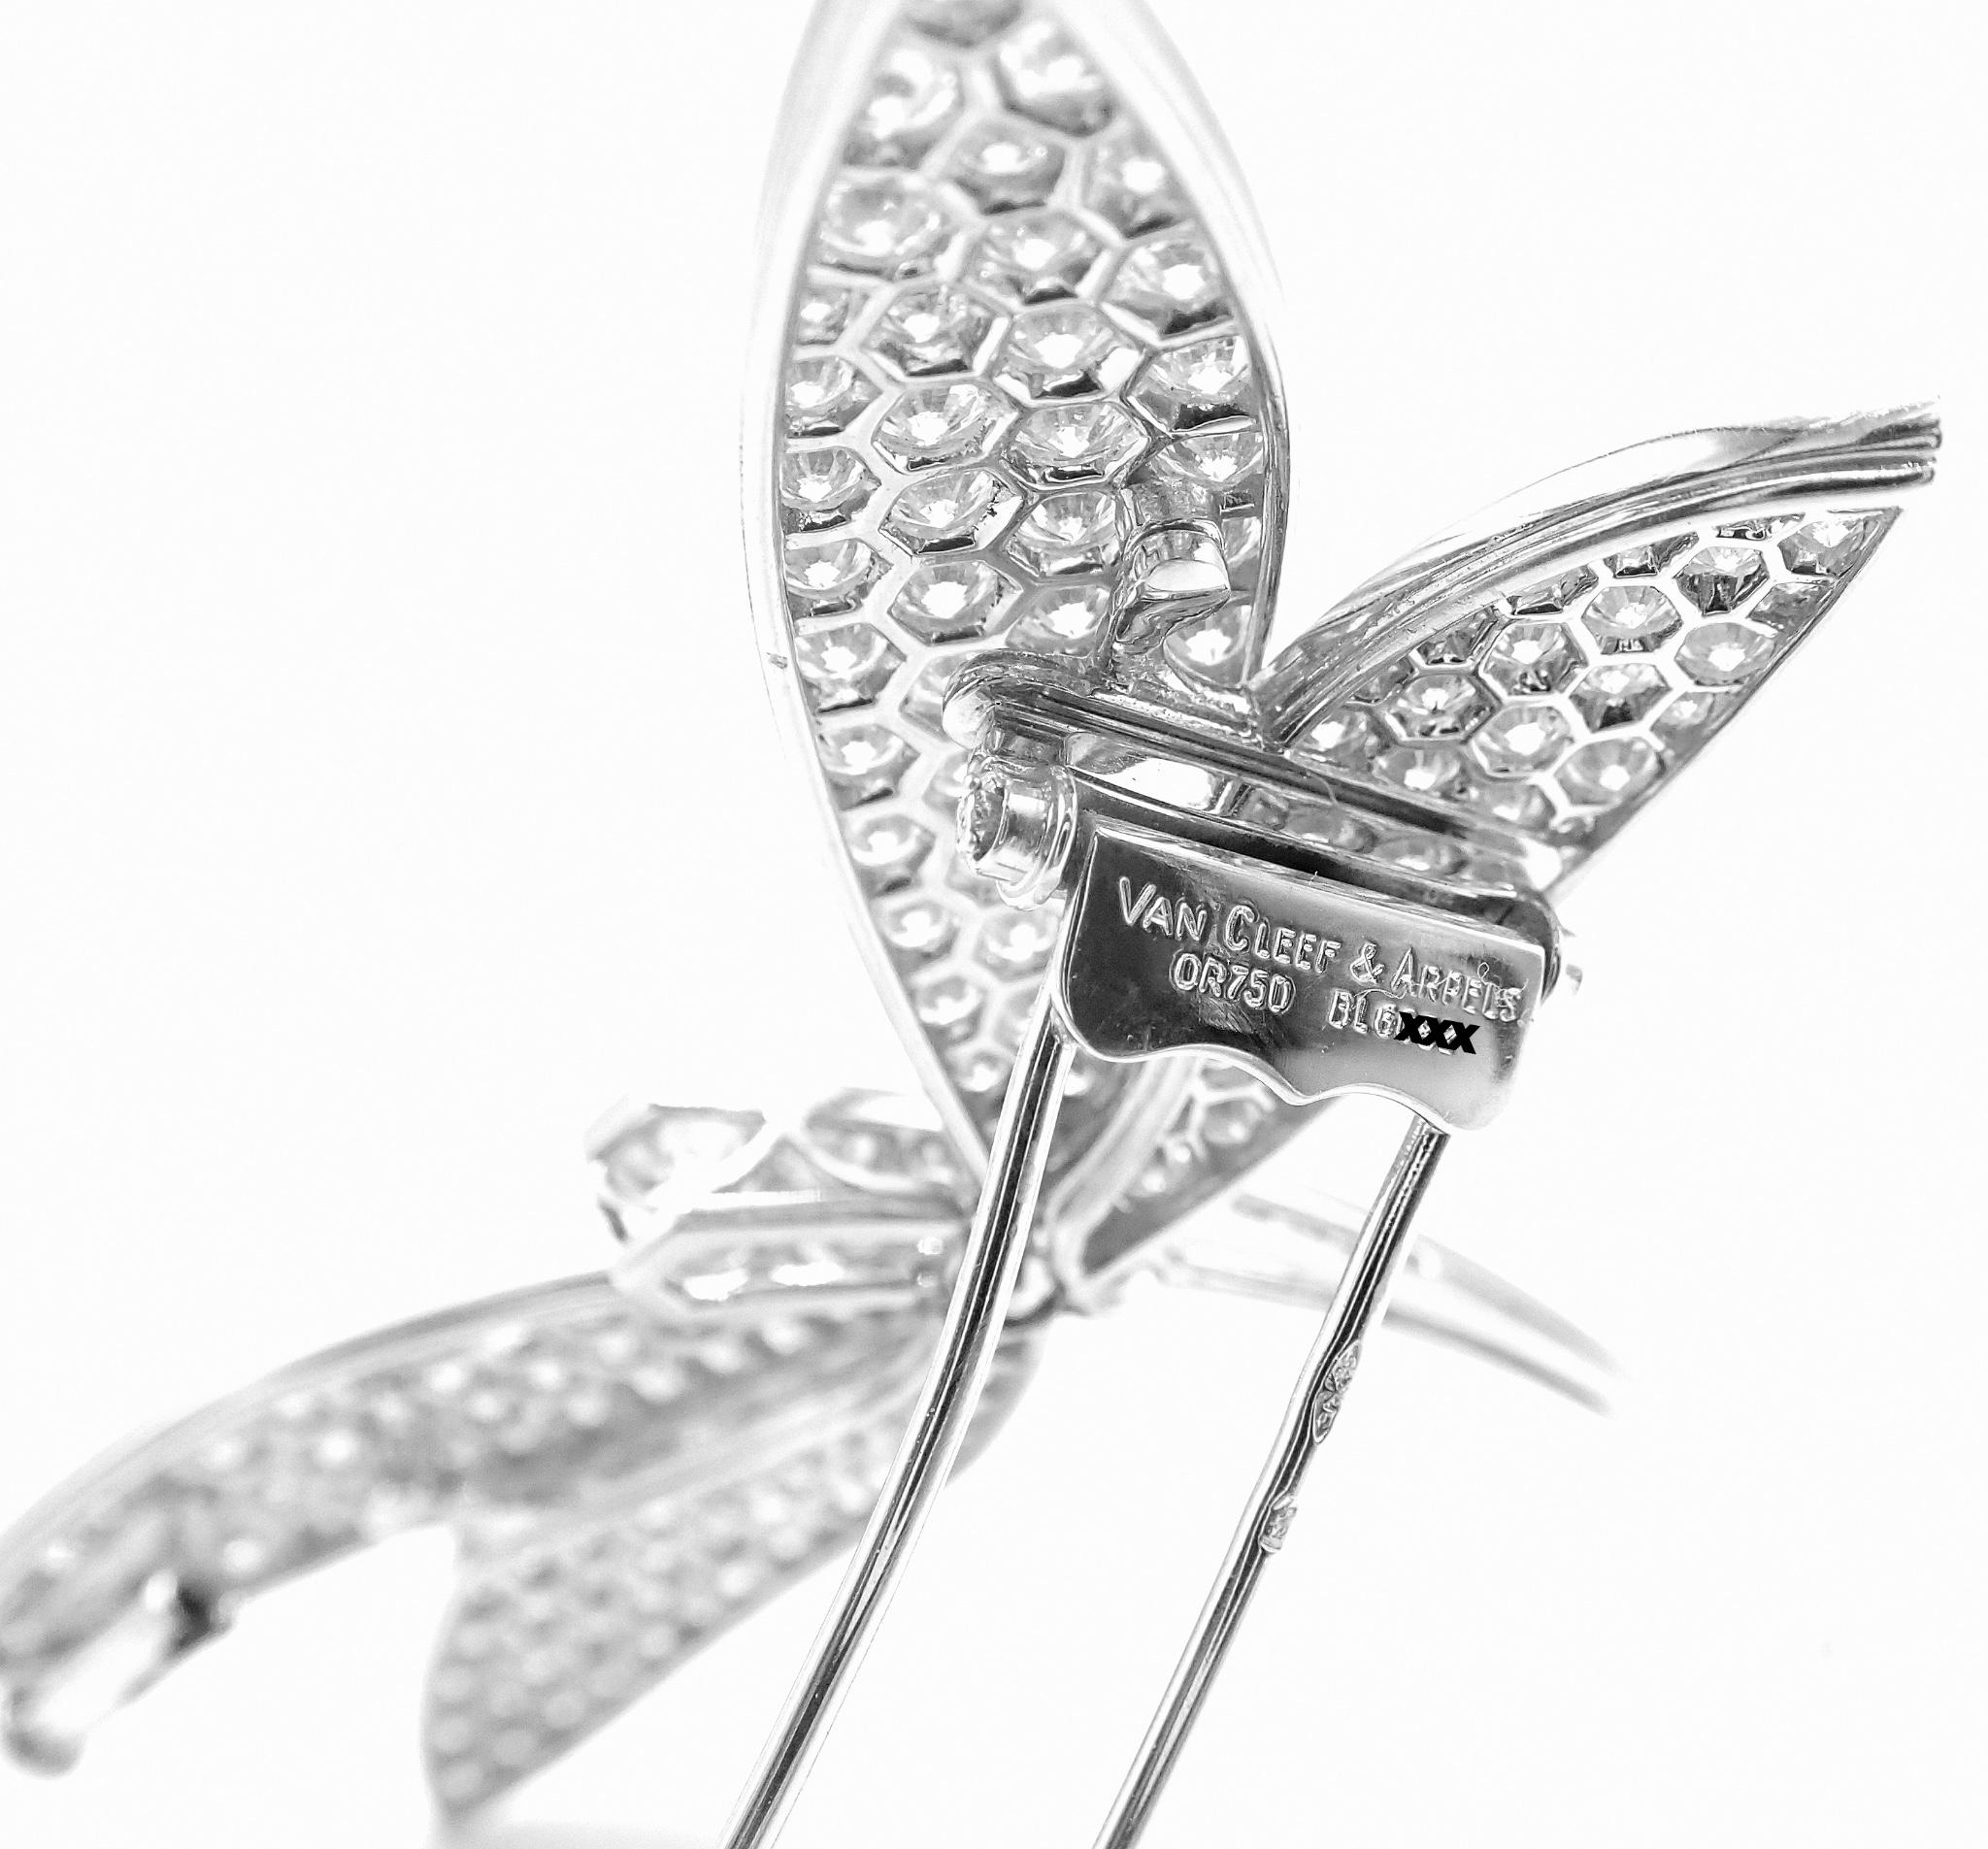 Van Cleef & Arpels Dragonfly Diamond Extra Large White Gold Pin Brooch 4